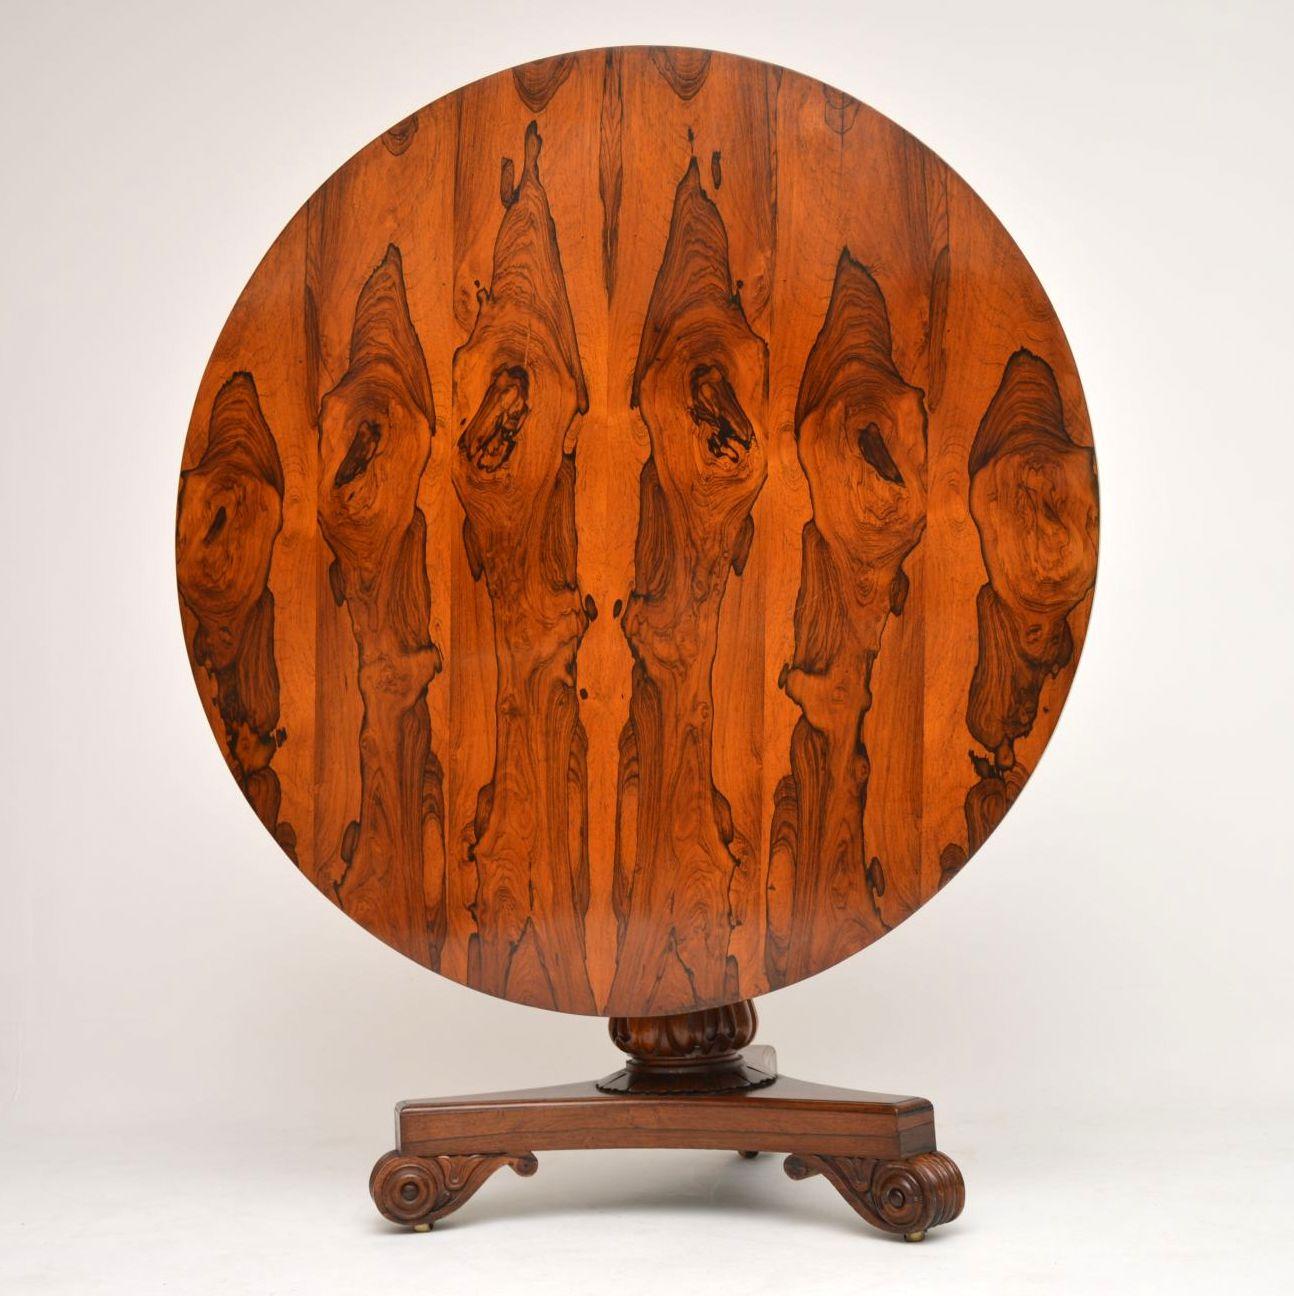 This antique William IV dining table has to be one of the nicest ones I've come across. It's all original, extremely fine quality and in excellent condition. The pattern of the veneers on the top are stunning and very unusual. The central round